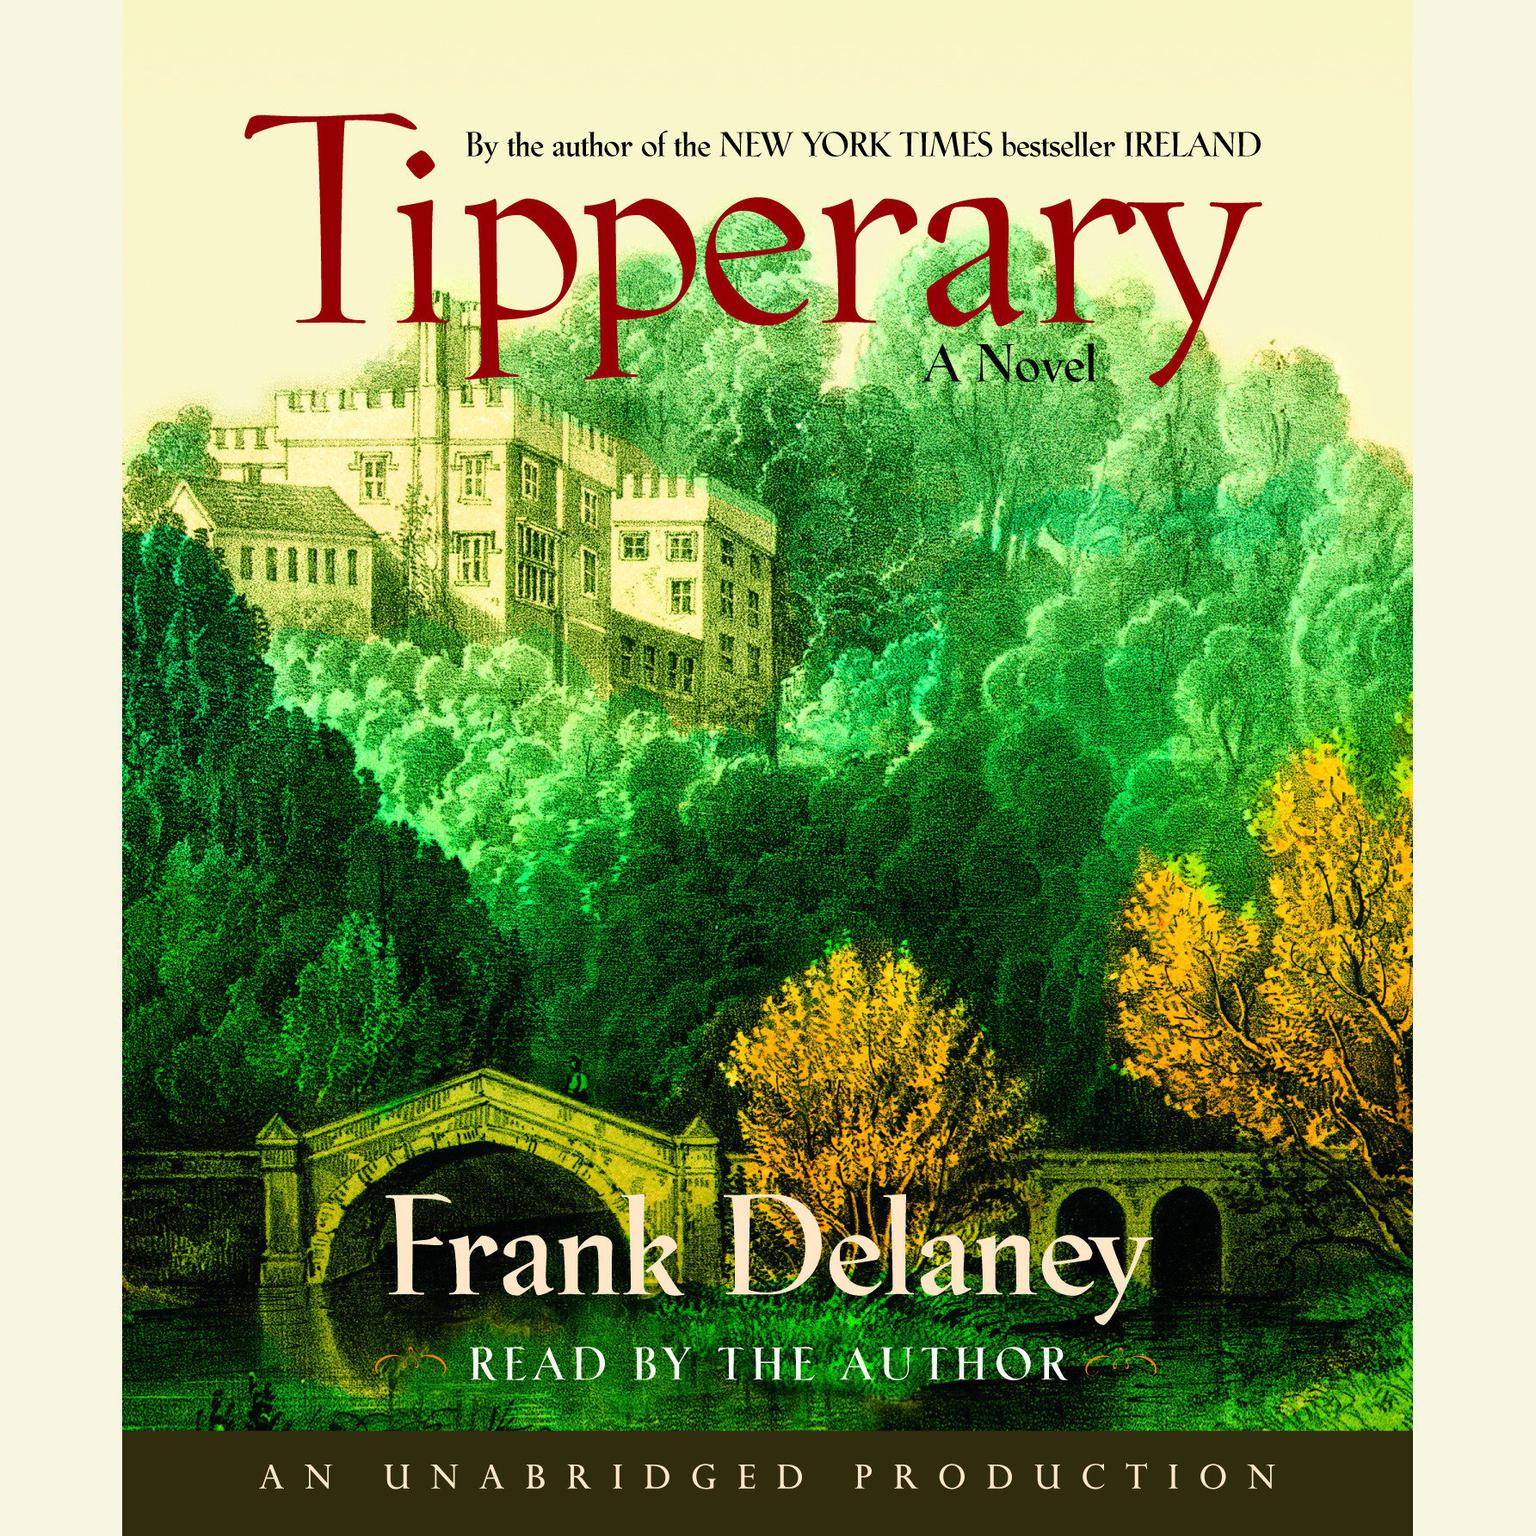 Tipperary: A Novel of Ireland Audiobook, by Frank Delaney